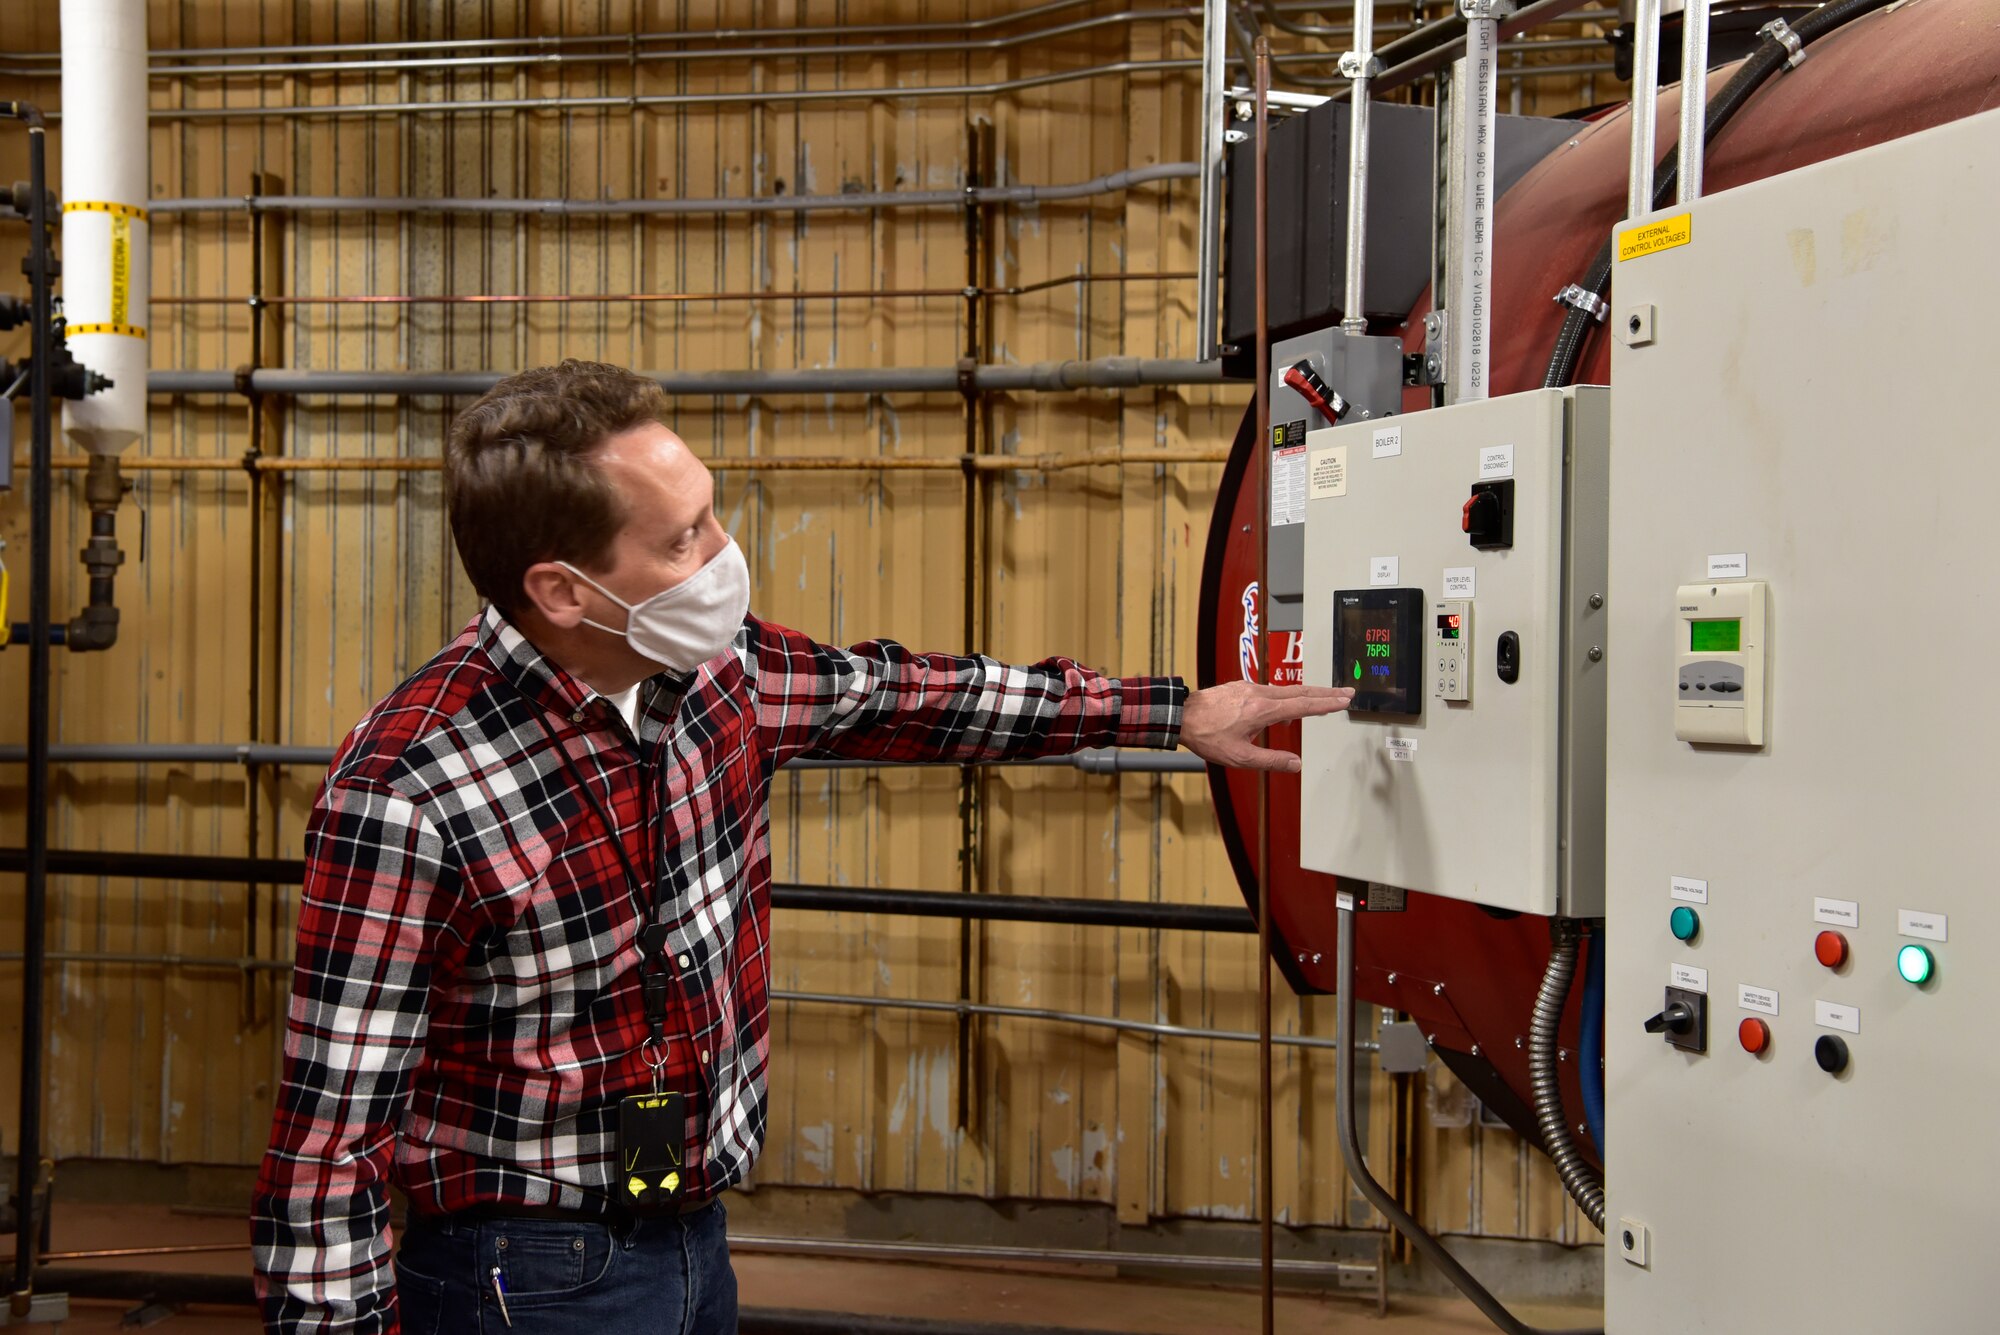 Joseph Cecrle, OC-ALC energy manager, checks the control panel on a new process steam boiler in one of many distributed systems that replaced the old centralized steam plant.